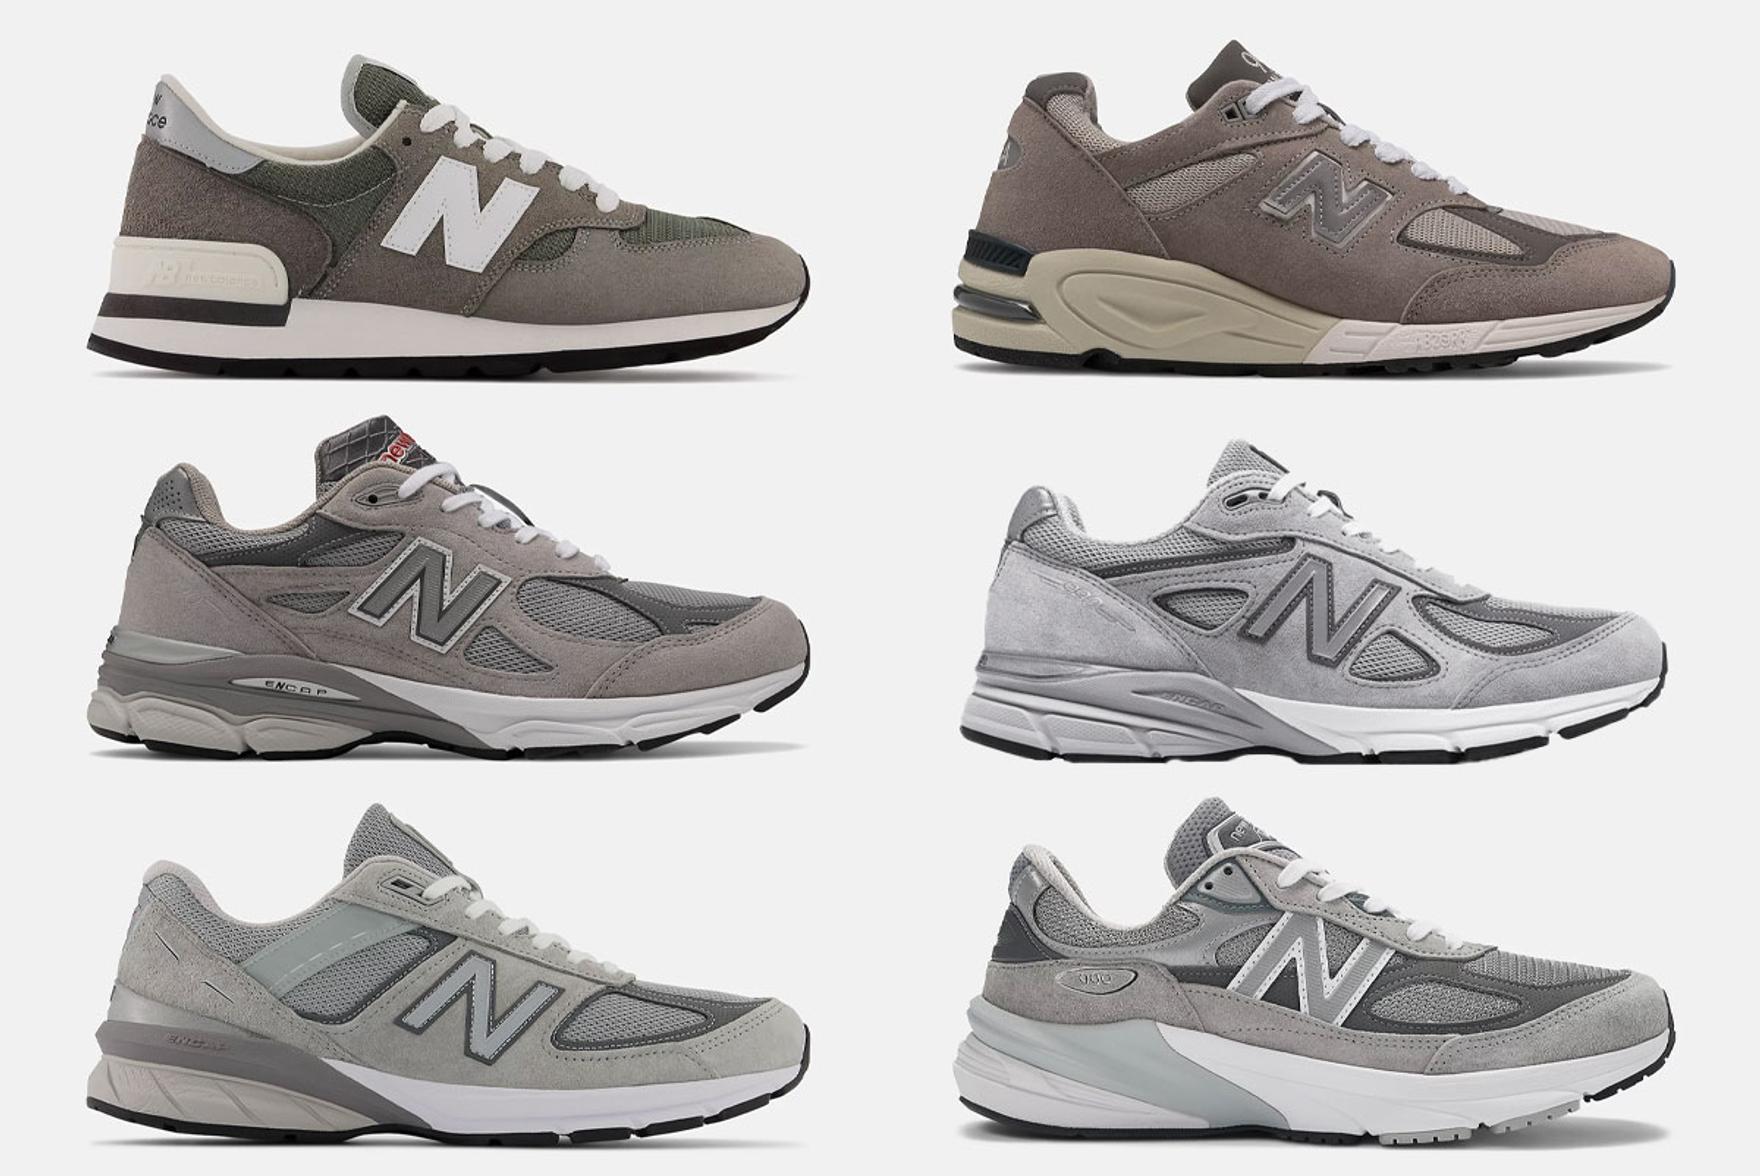 New Balance 990 Series: Breaking Down the Differences